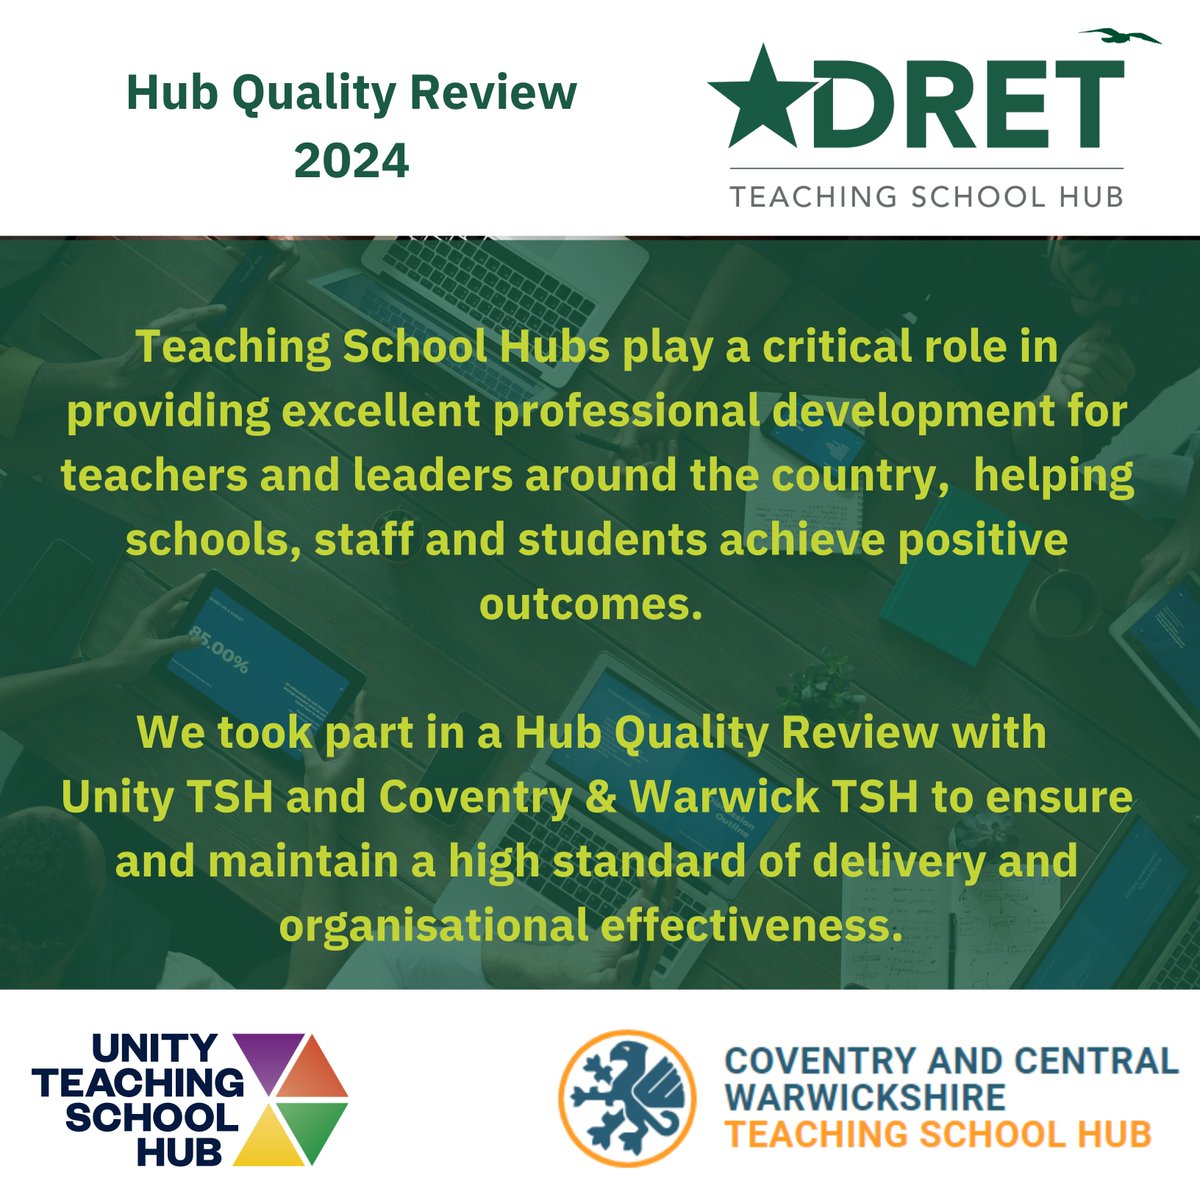 It was fantastic to meet @UnityTSH & Coventry & Central Warwickshire @CentralTsh to immerse ourselves in conversation about all things TSH, as part of our DRET TSH Quality Review @DRETnews @TSHubsCouncil #TSH